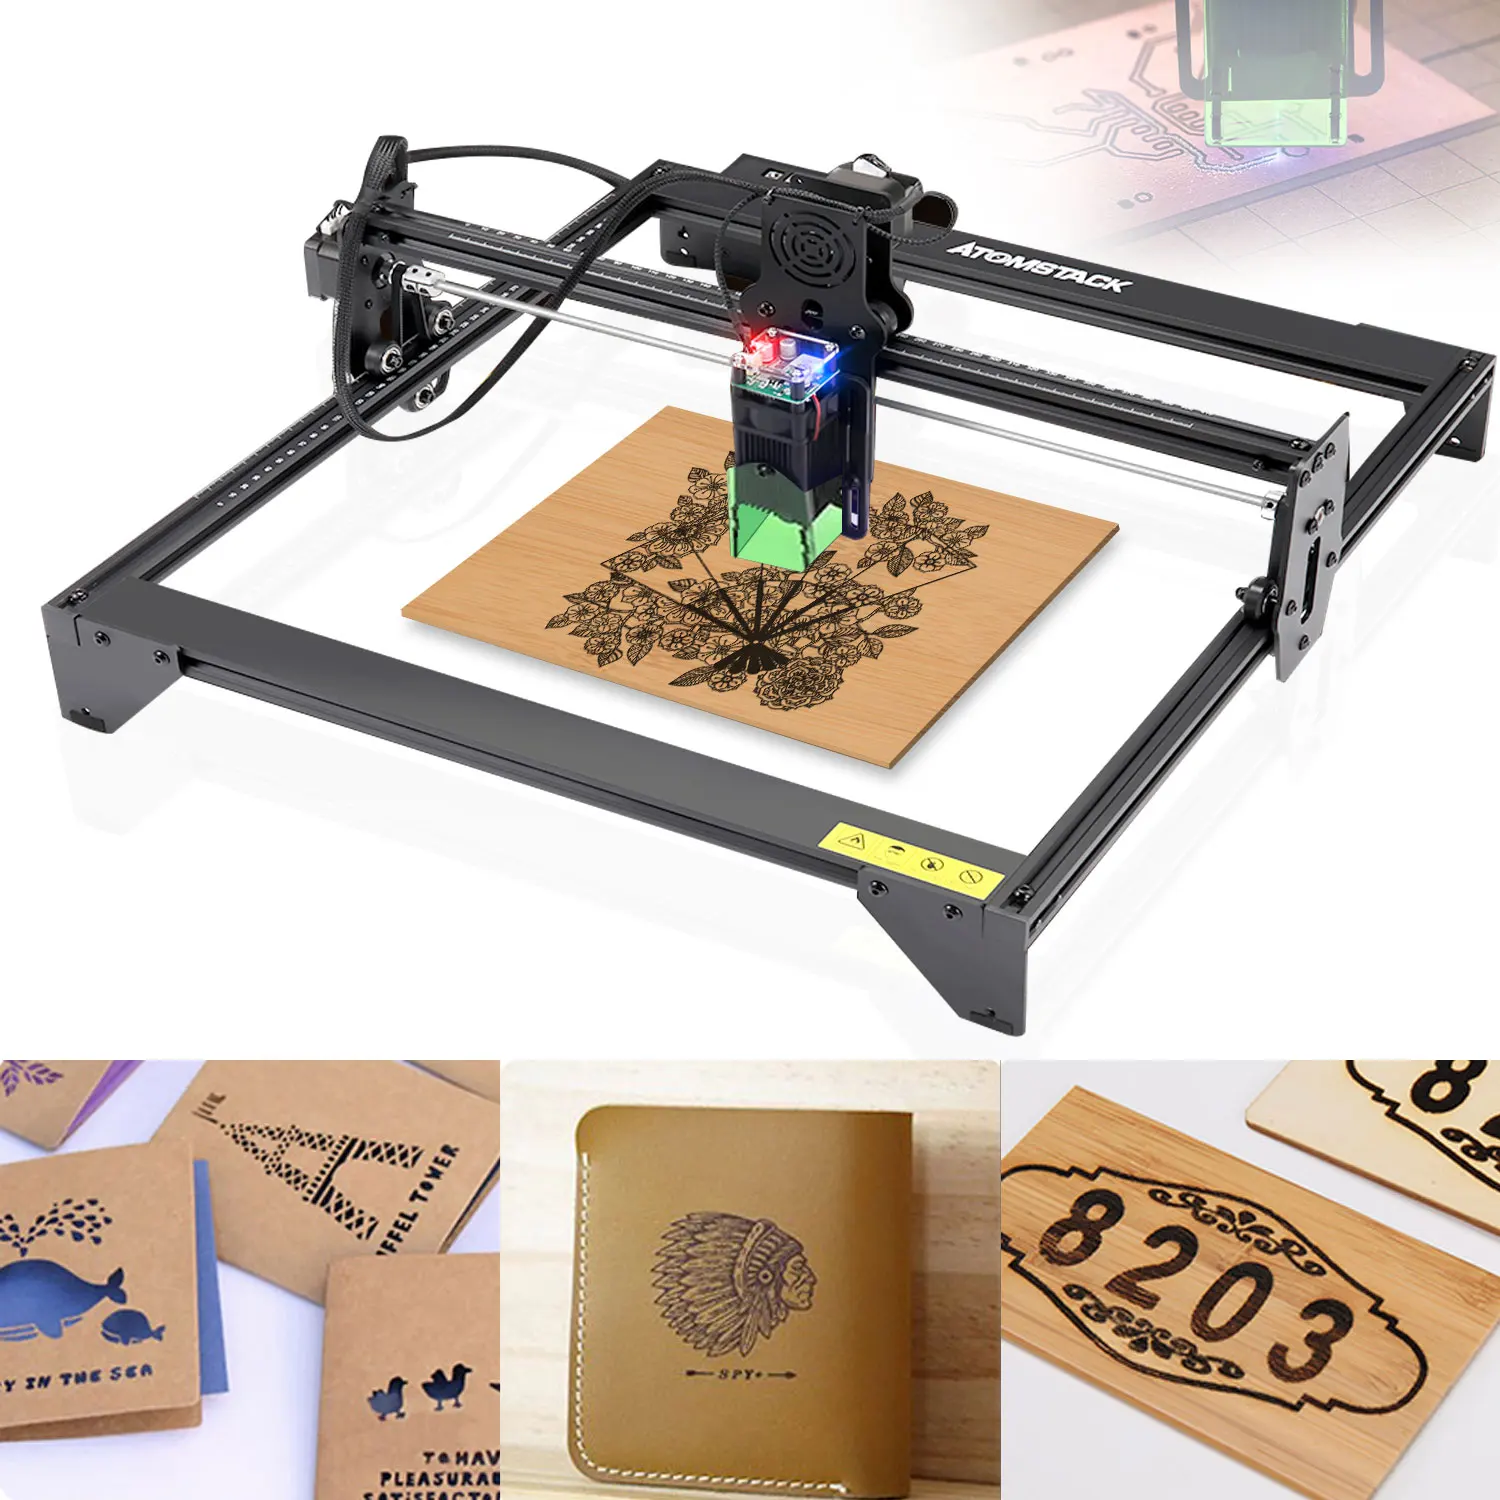 

ATOMSTACK A5 20W Laser Engraver CNC 410*400mm Carving Area Cutting Machine Full-metal Structure Fixed-focus Laser Eye Protection